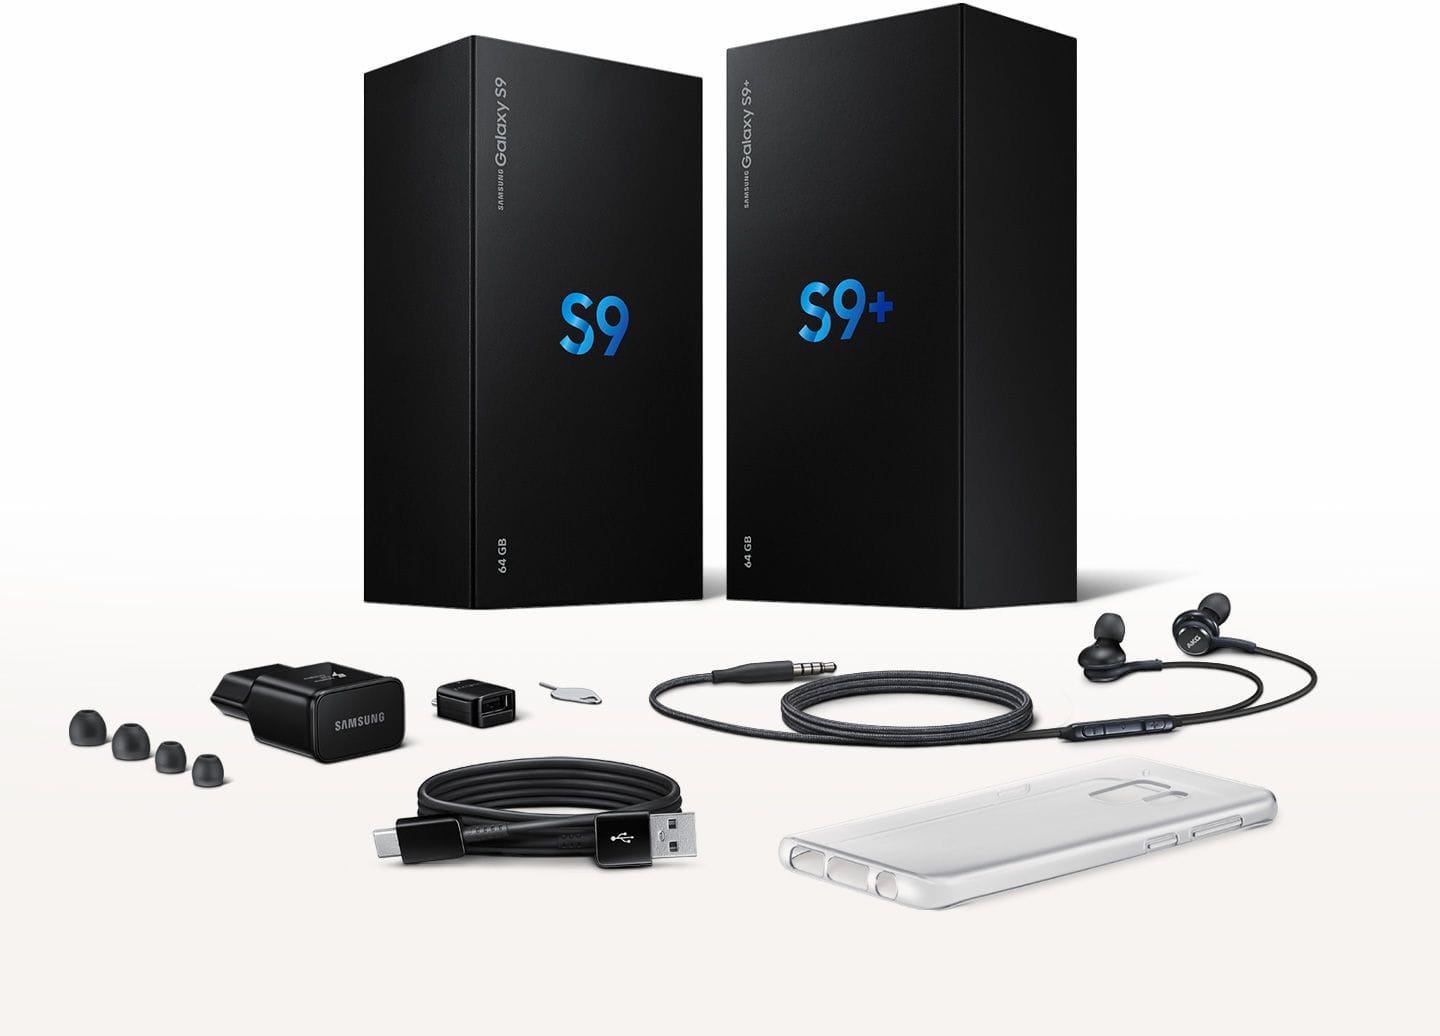 Image of Galaxy S9 and Galaxy S9+ boxes with included accessories